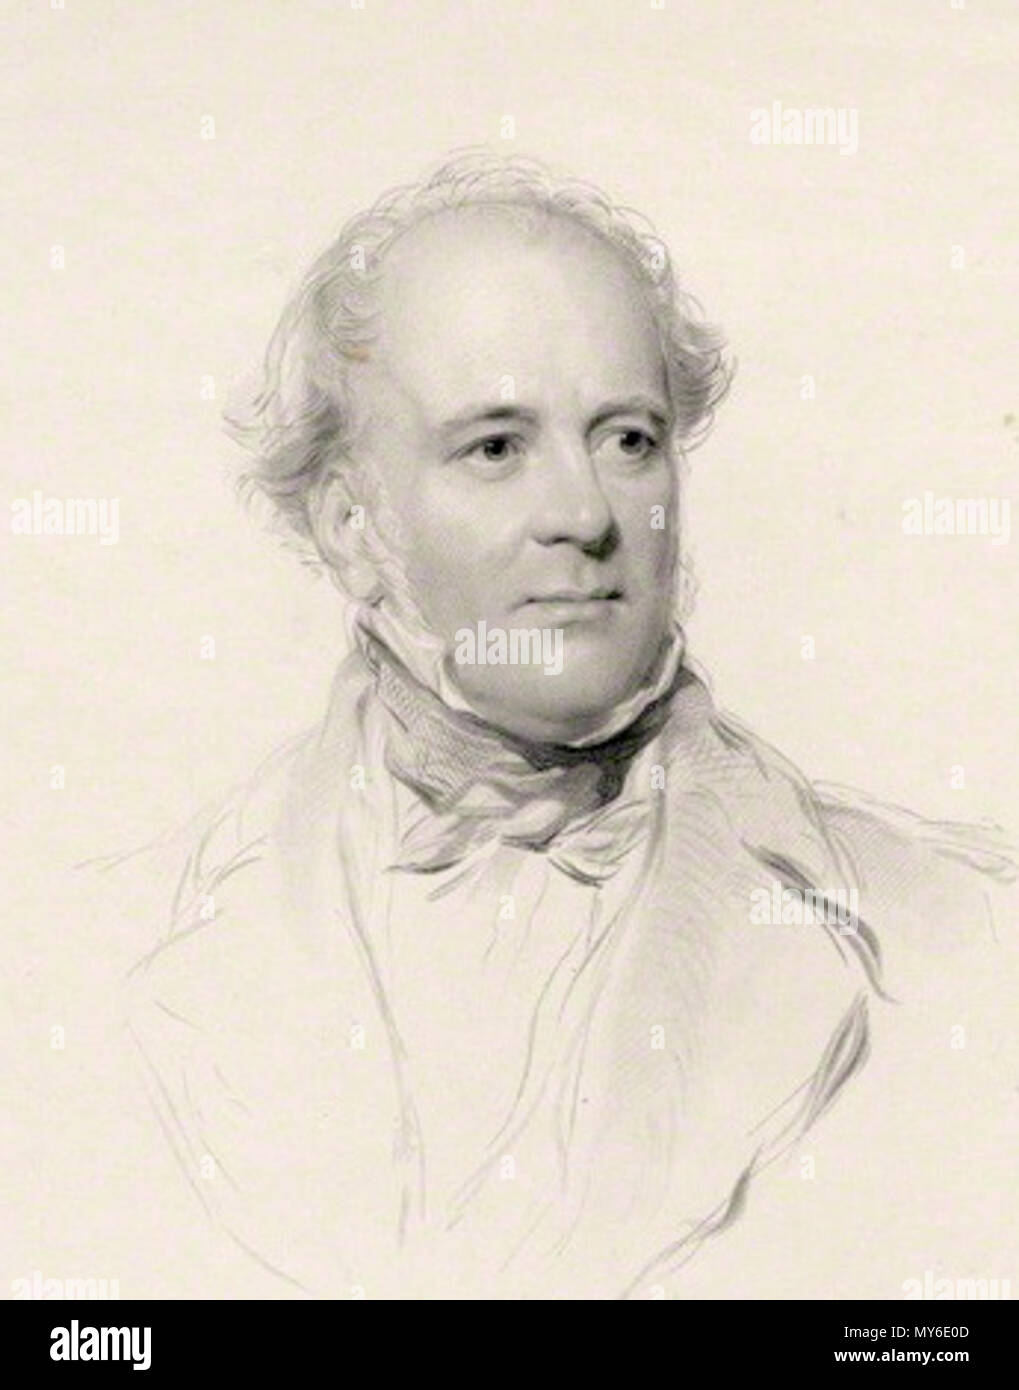 . English: Andrew Rutherfurd, Lord Rutherfurd (1791-1854) . circa 1852. possibly by Frederick Christian Lewis, after George Richmond 465 LordRuterfurd Stock Photo